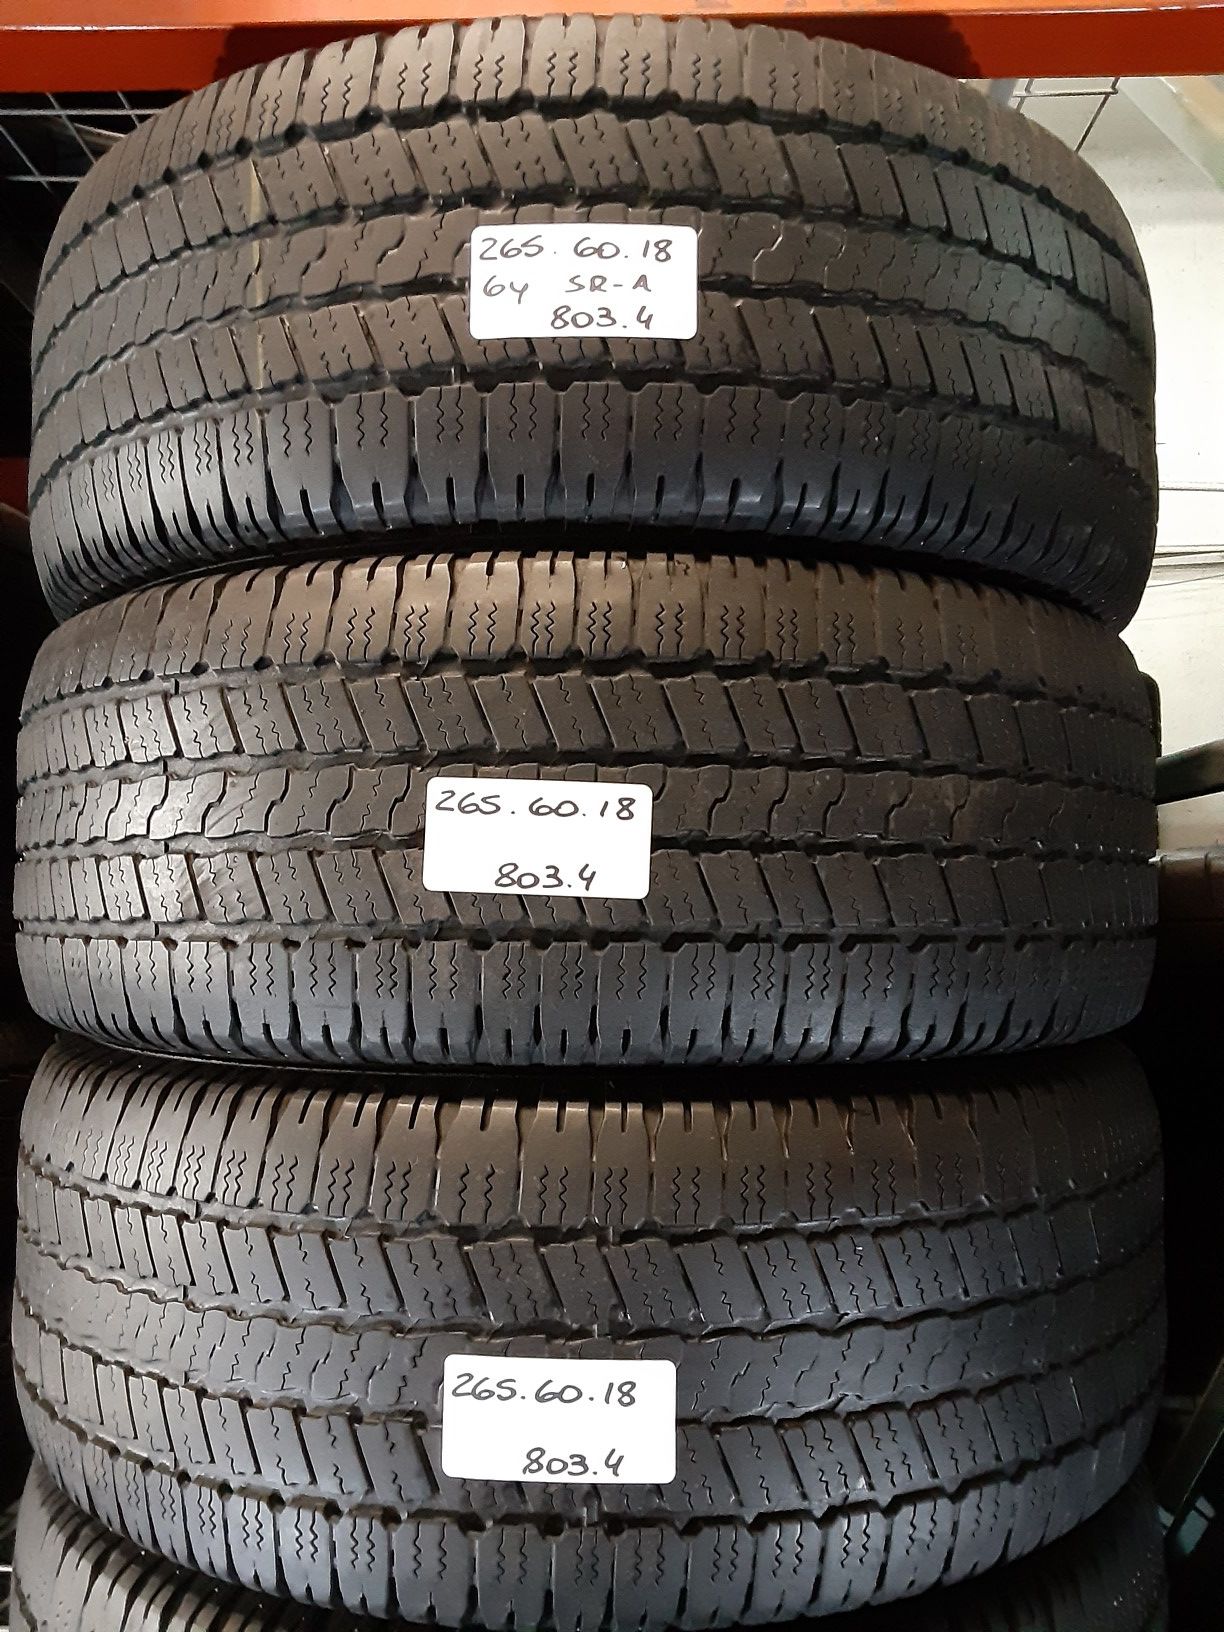 (4) USED TIRES P265/60R18 GOODYEAR WRANGLER SR-A 265/60R18 MATCHING FULL  SET ALL SEASON TIRES 265 60 18 for Sale in Fort Lauderdale, FL - OfferUp